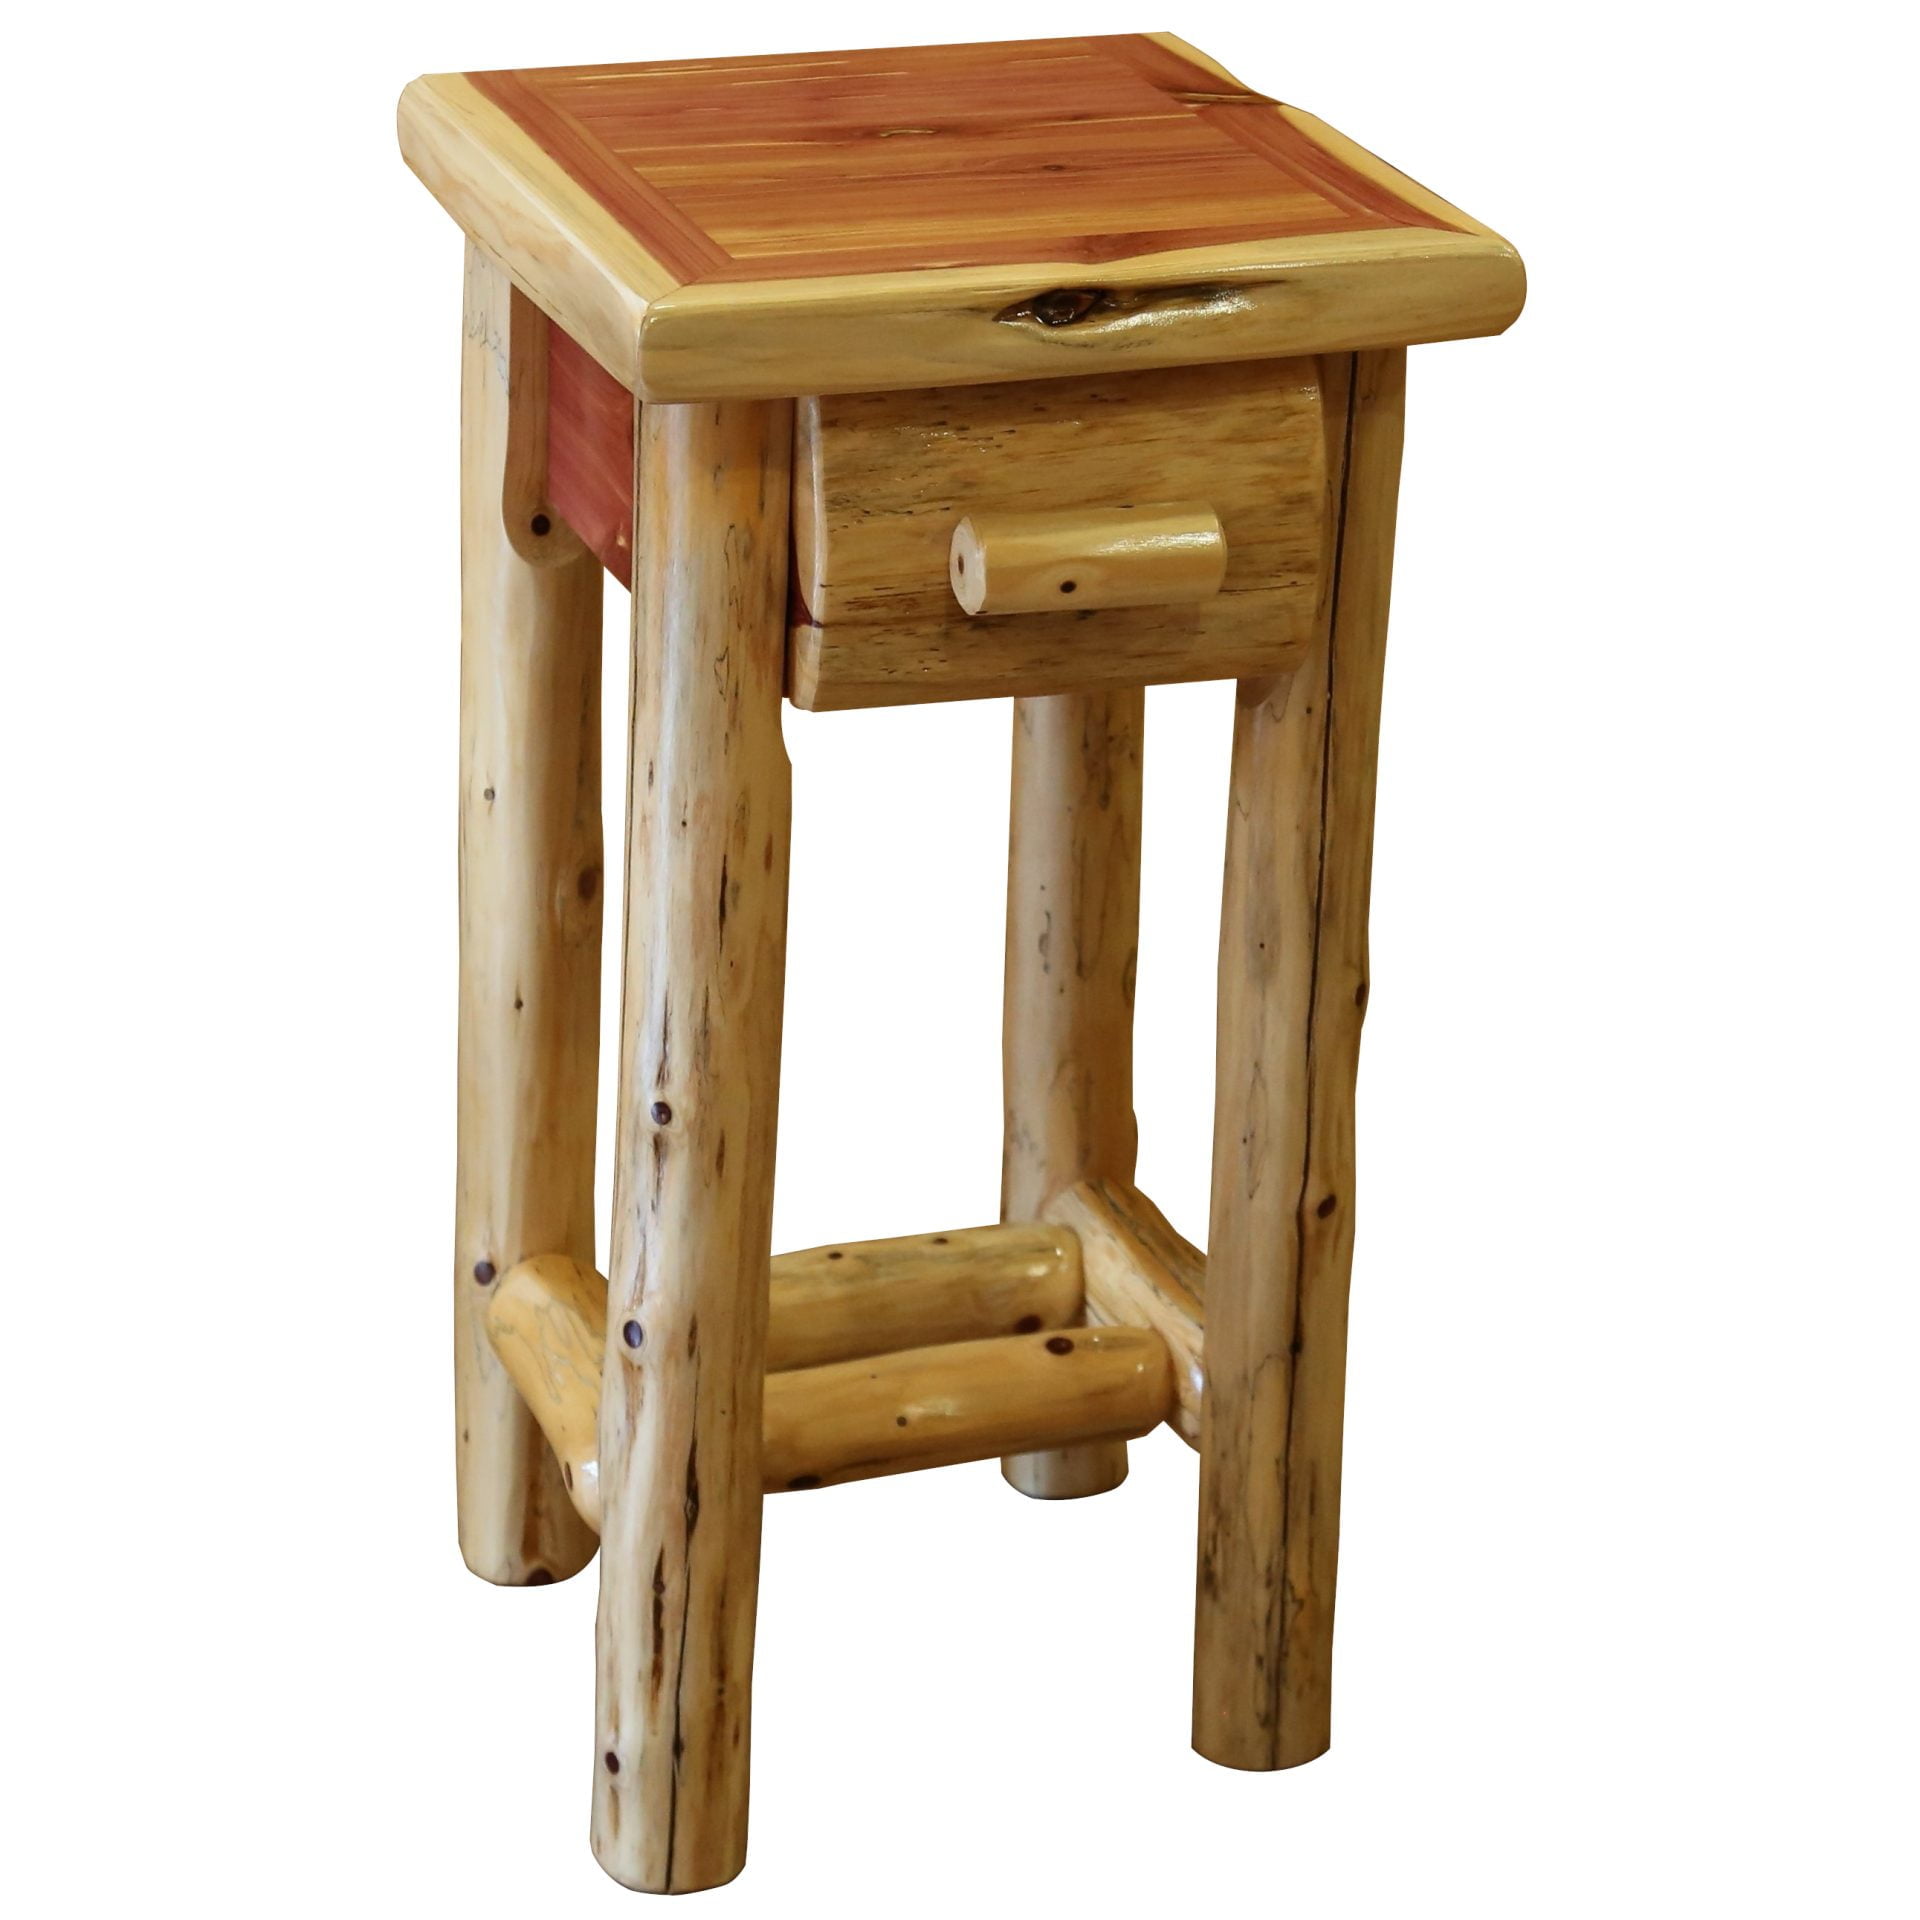 Rustic Red Cedar Log Small 1-Drawer End Table